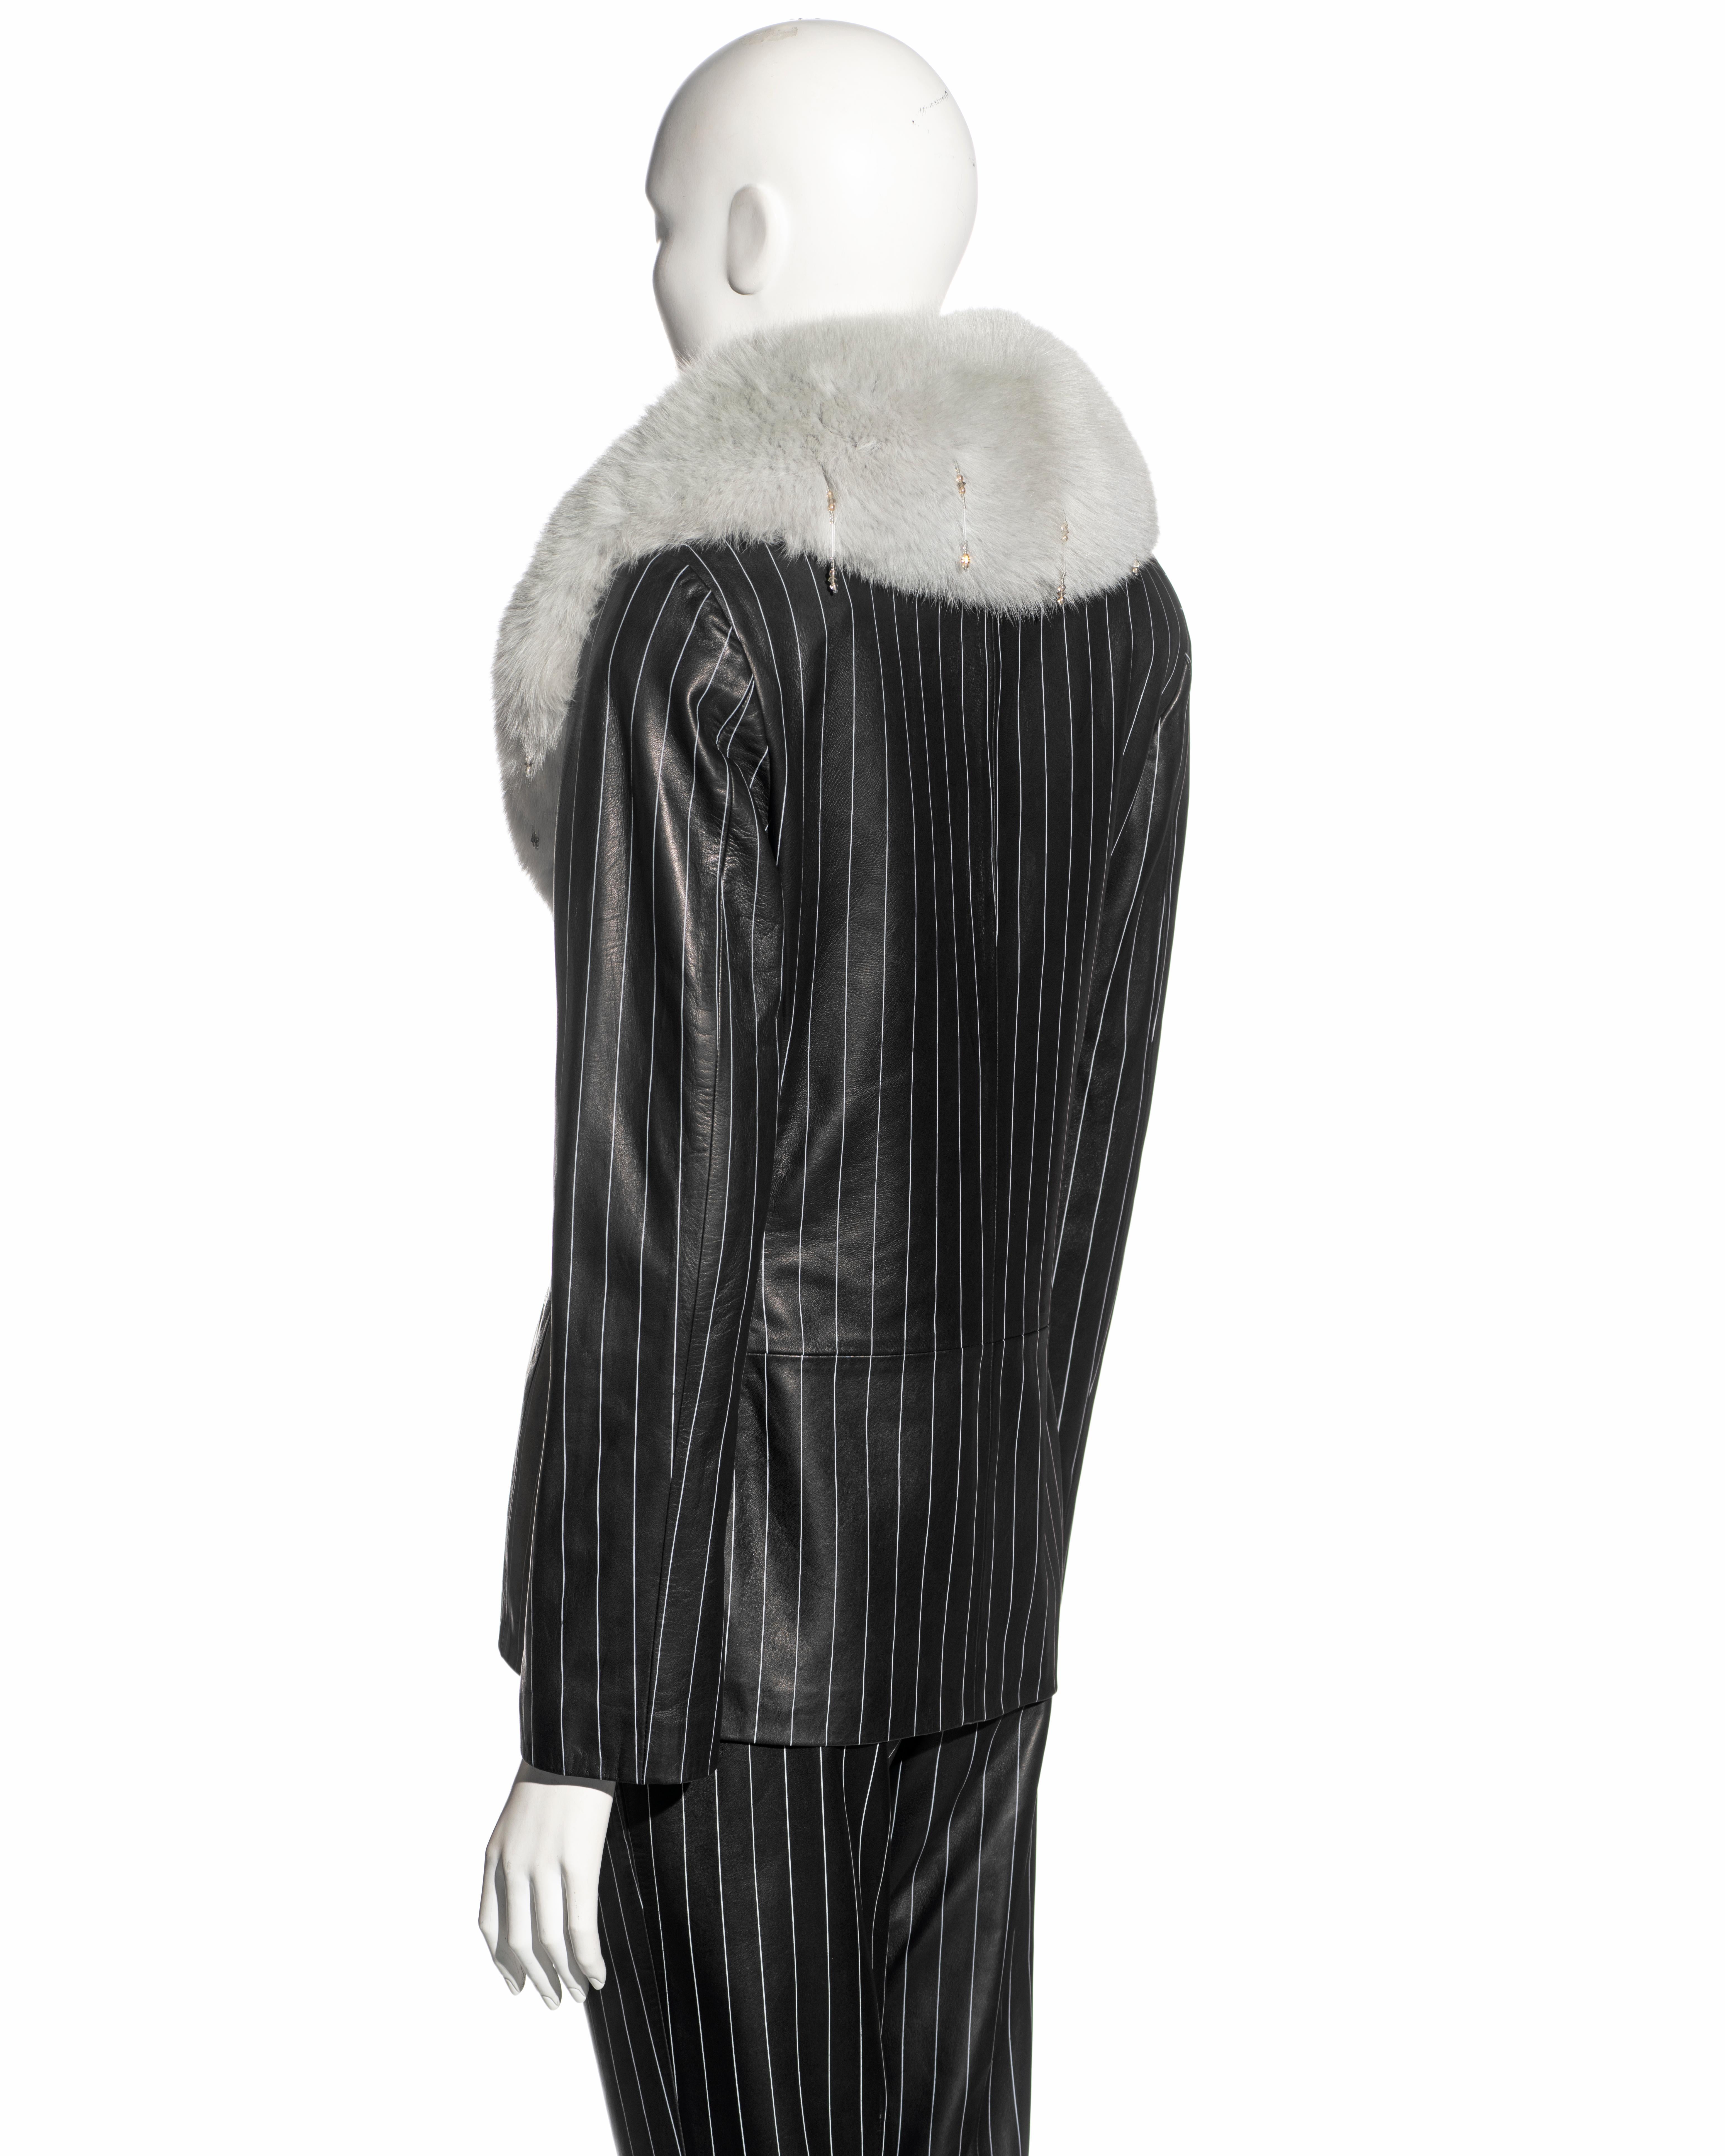 Gianni Versace black pinstripe leather and fox fur trouser suit, fw 1998 For Sale 7